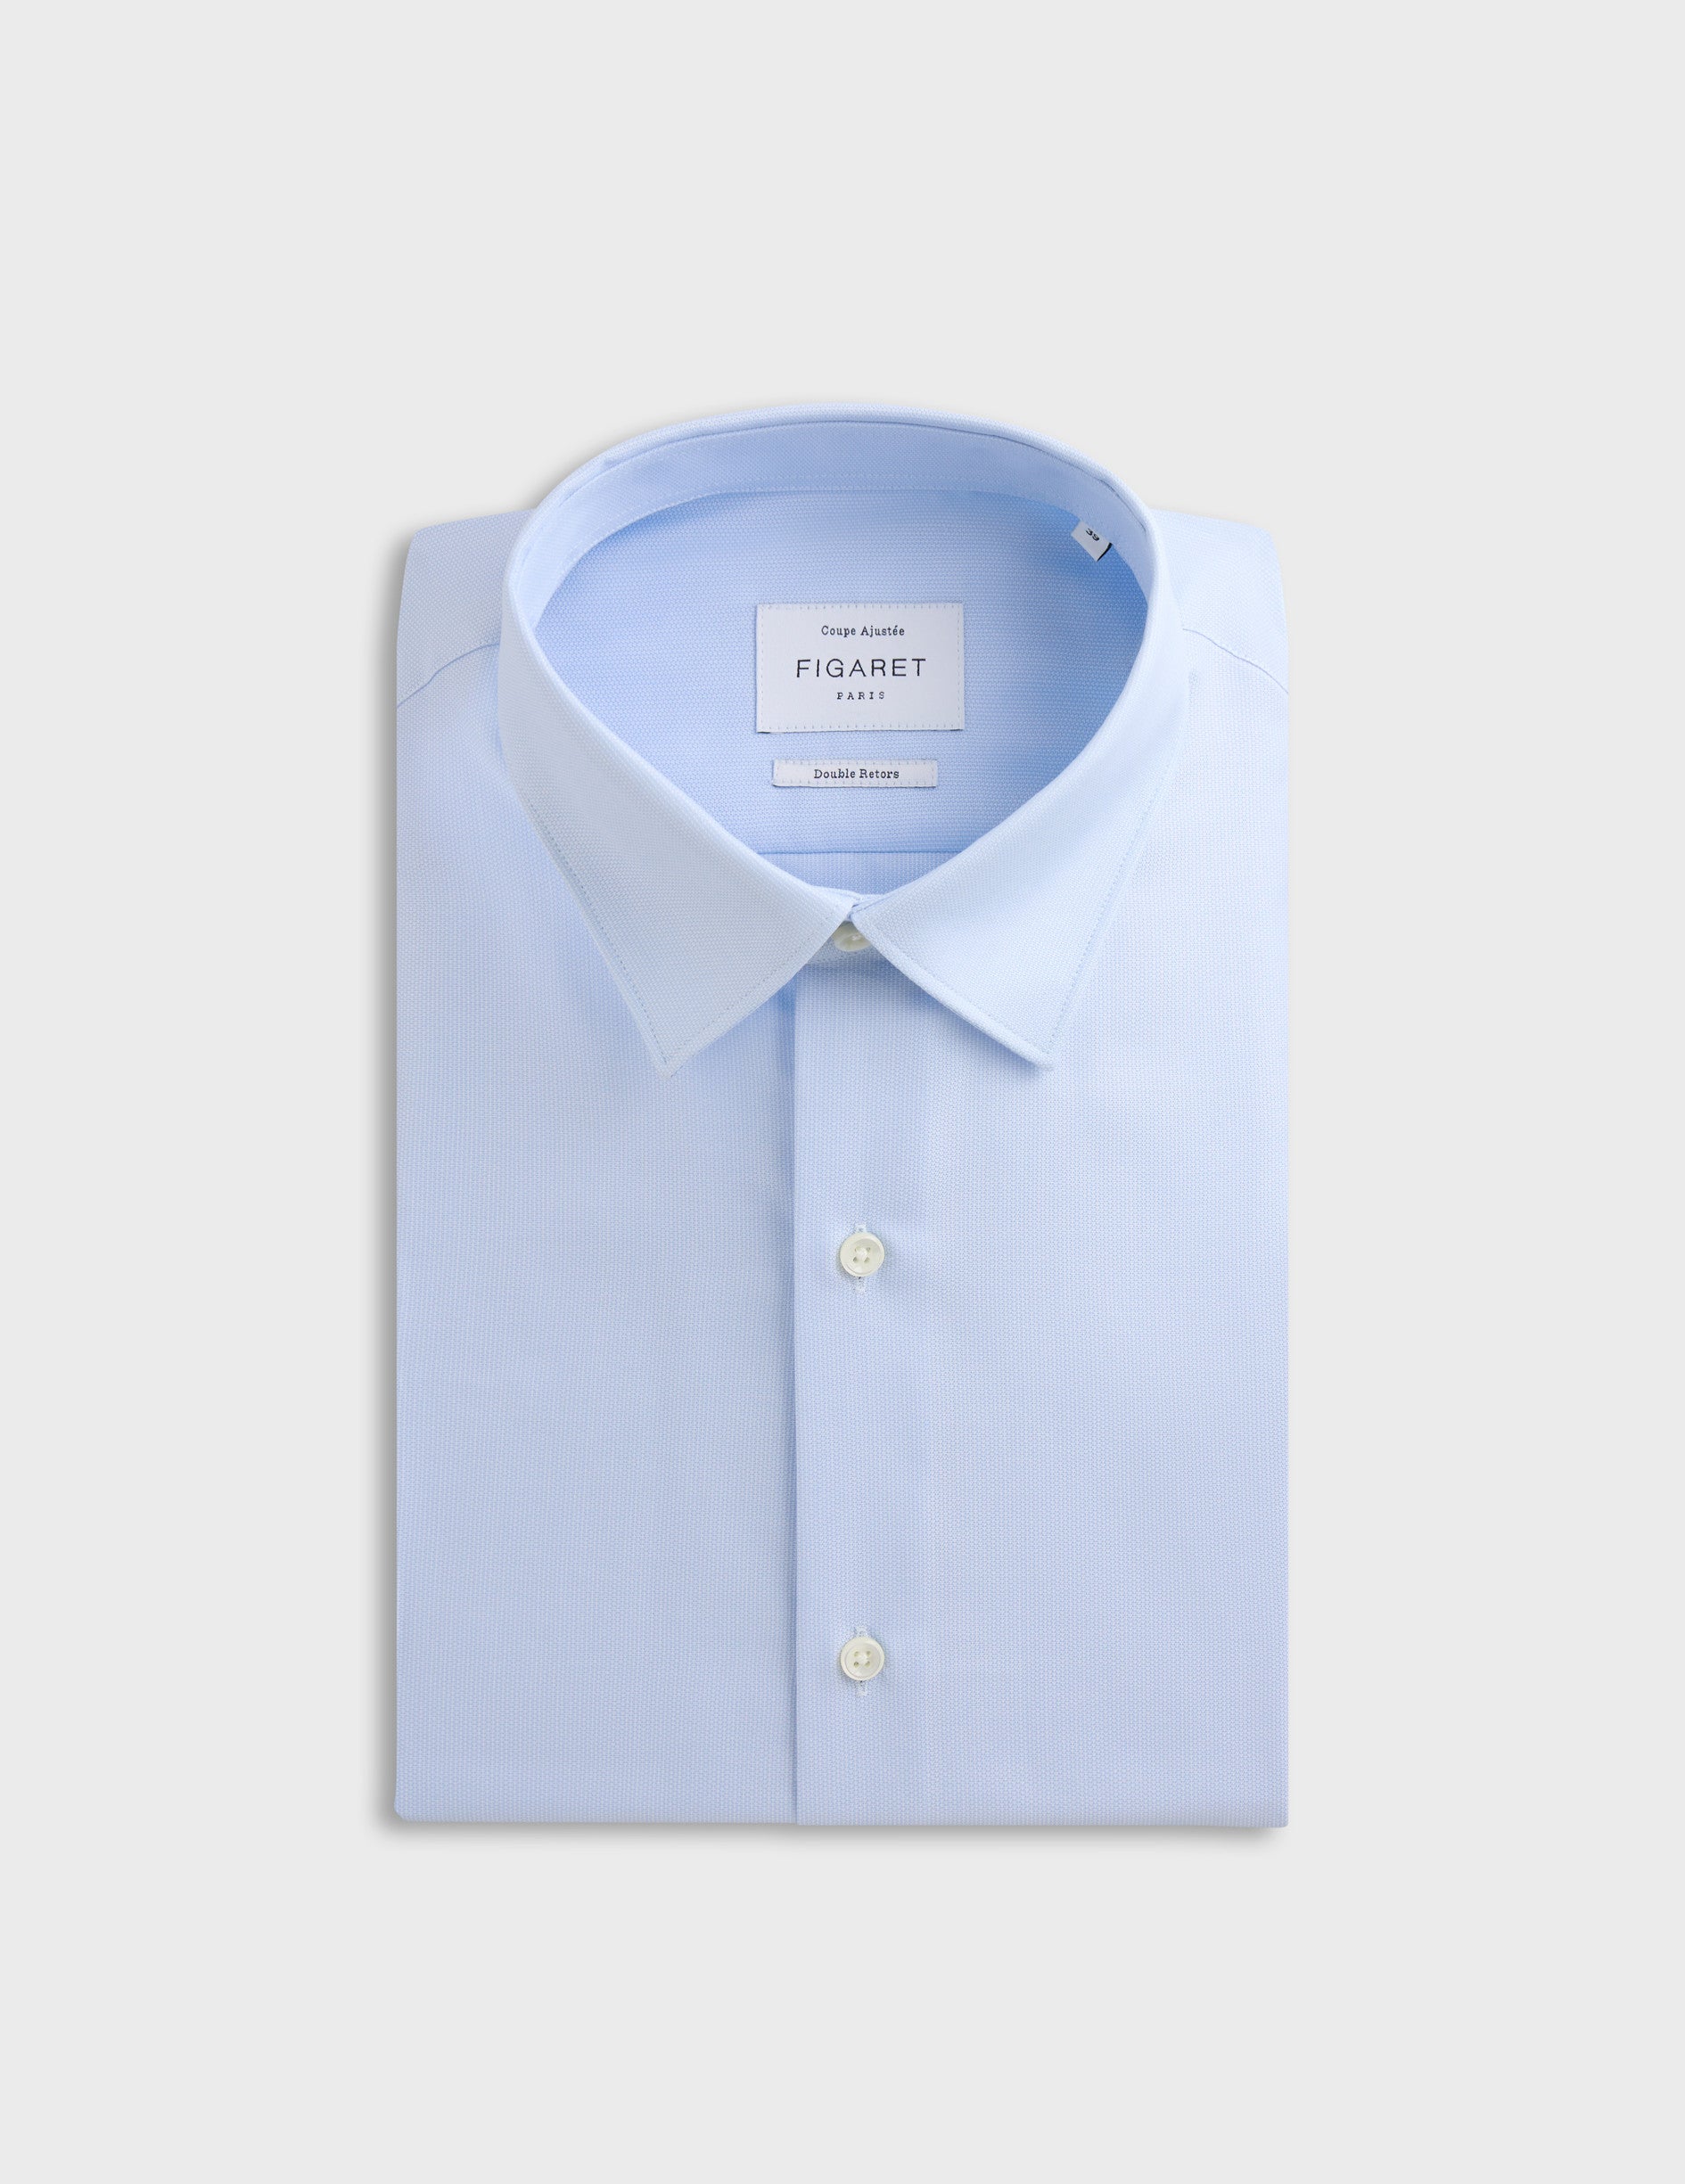 Fitted blue shirt - Shaped - Figaret Collar - French Cuffs